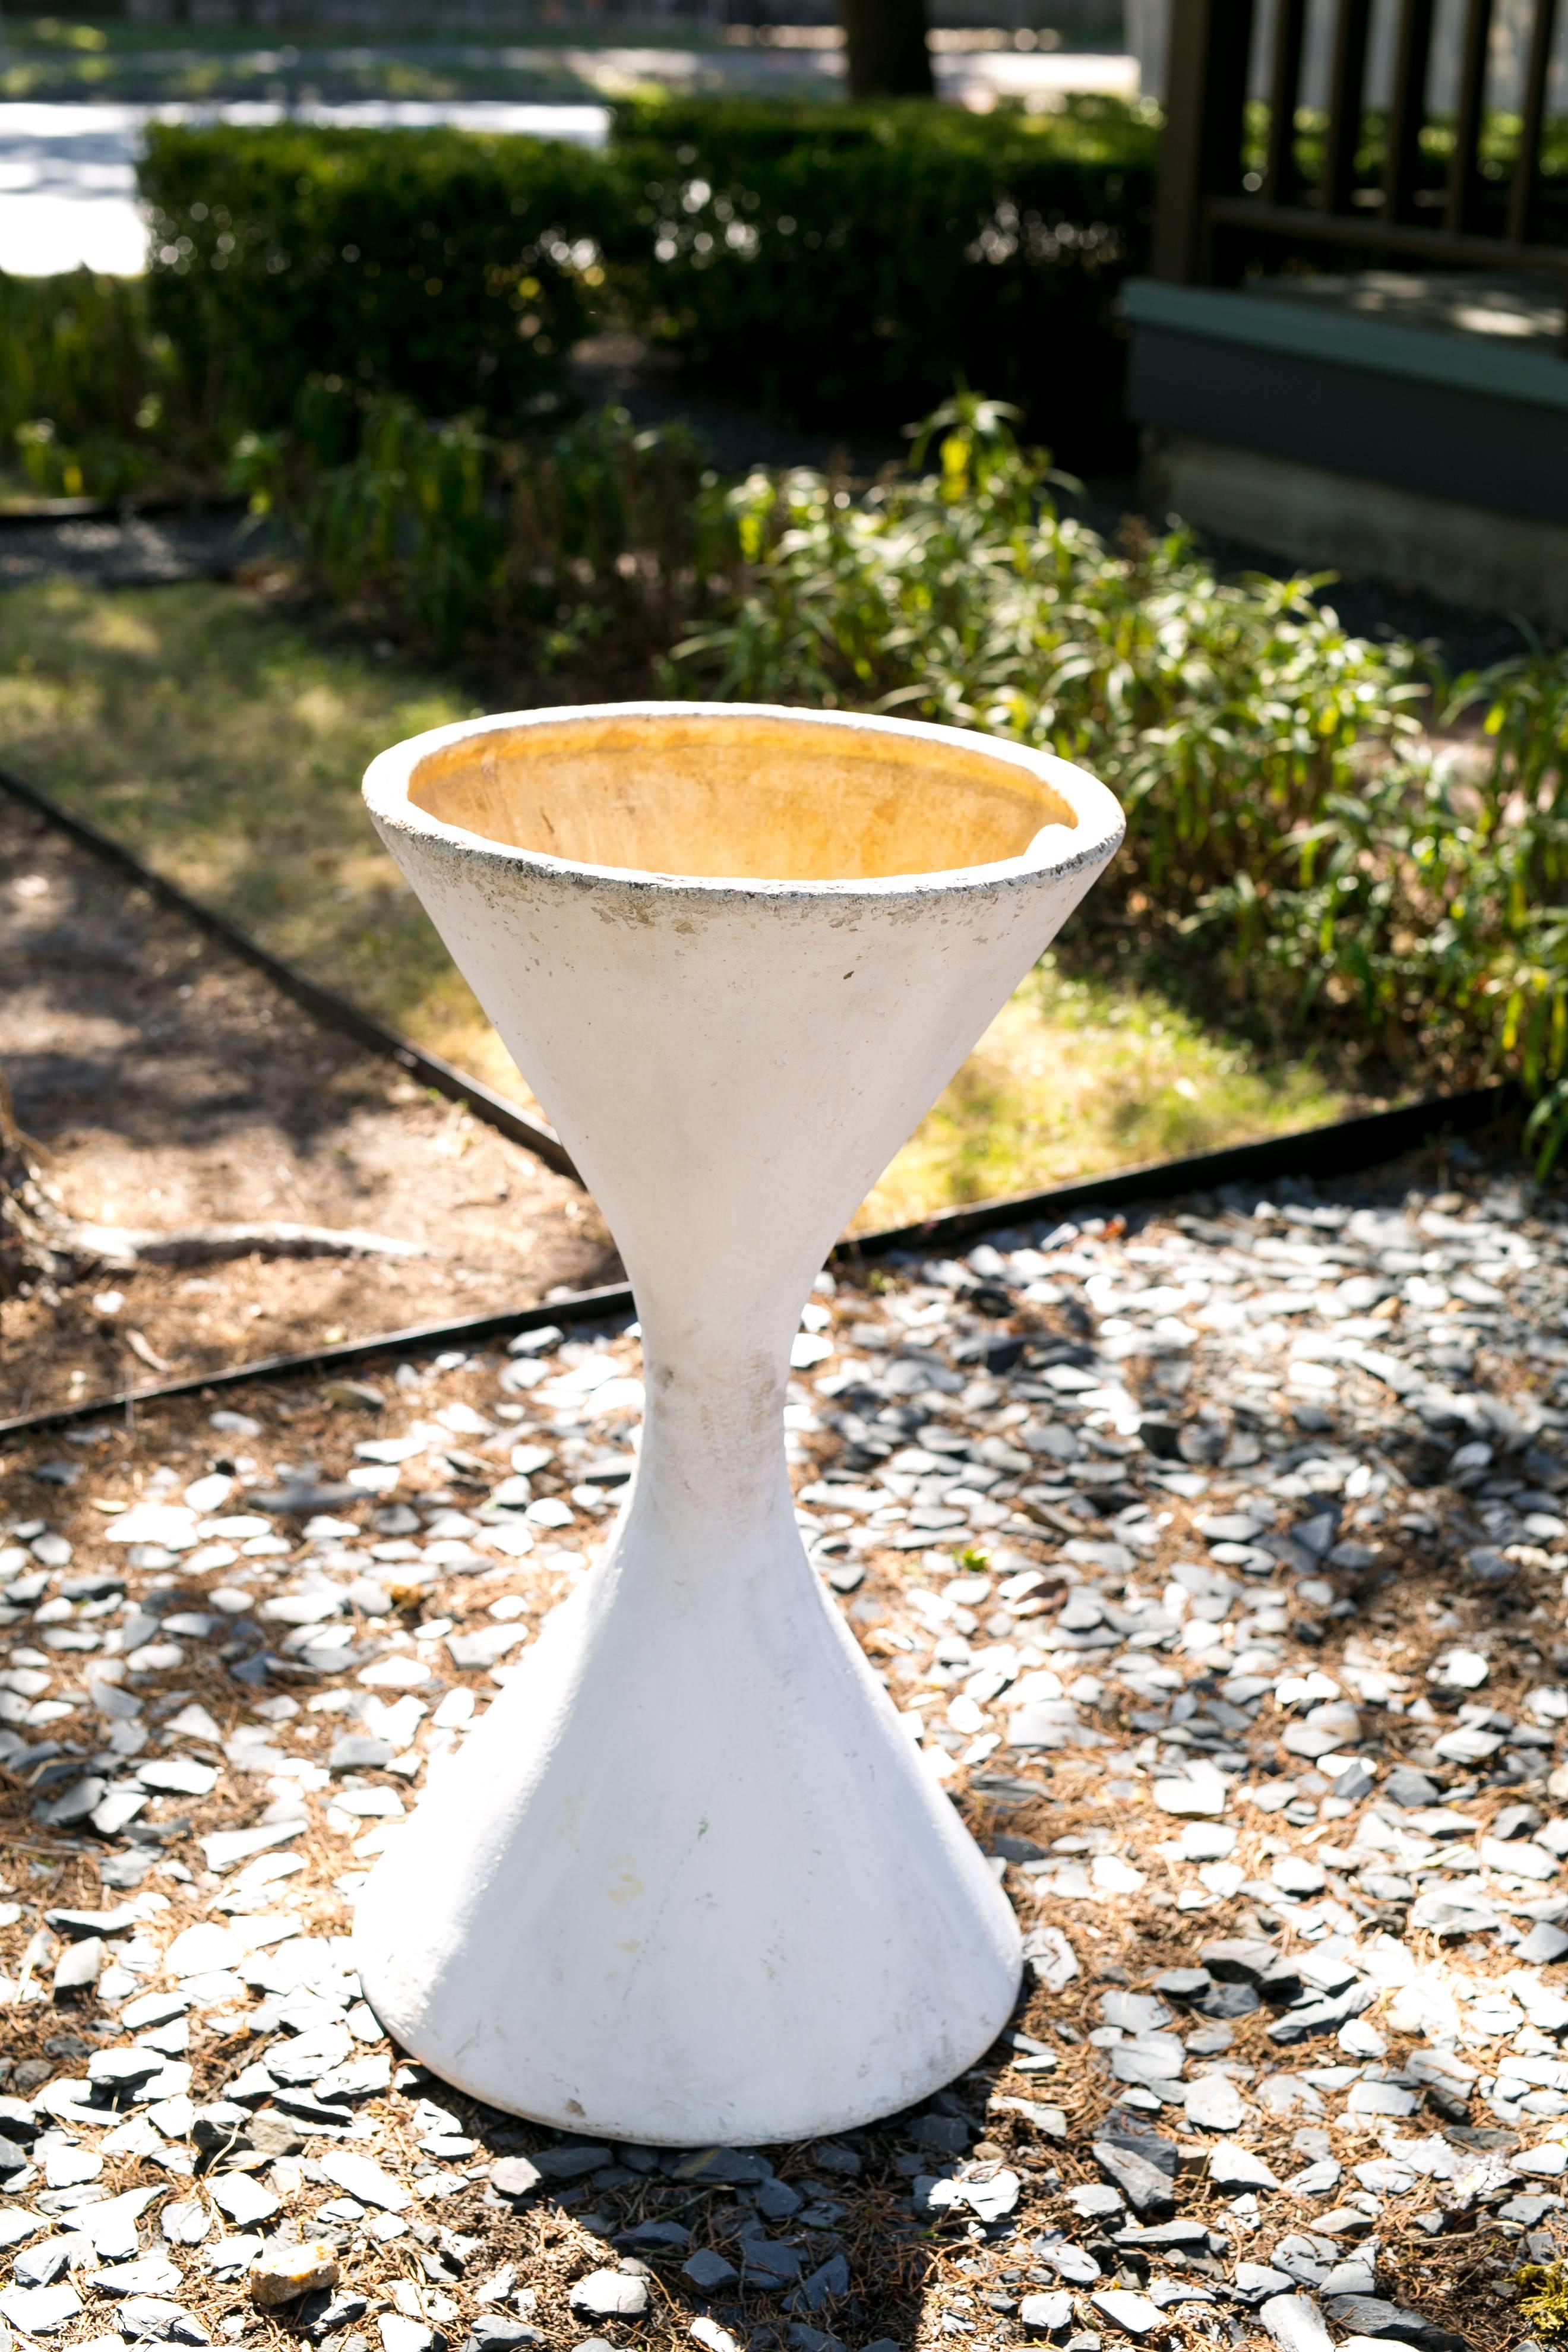 Wonderful vintage Willy Guhl spindle or diablo style planter from Swiss company Eternit Ag, circa 1950s. Is overpainted with white paint and is constructed of fiber cement. Great Mid Century Modern hourglass geometric design. Several different sizes